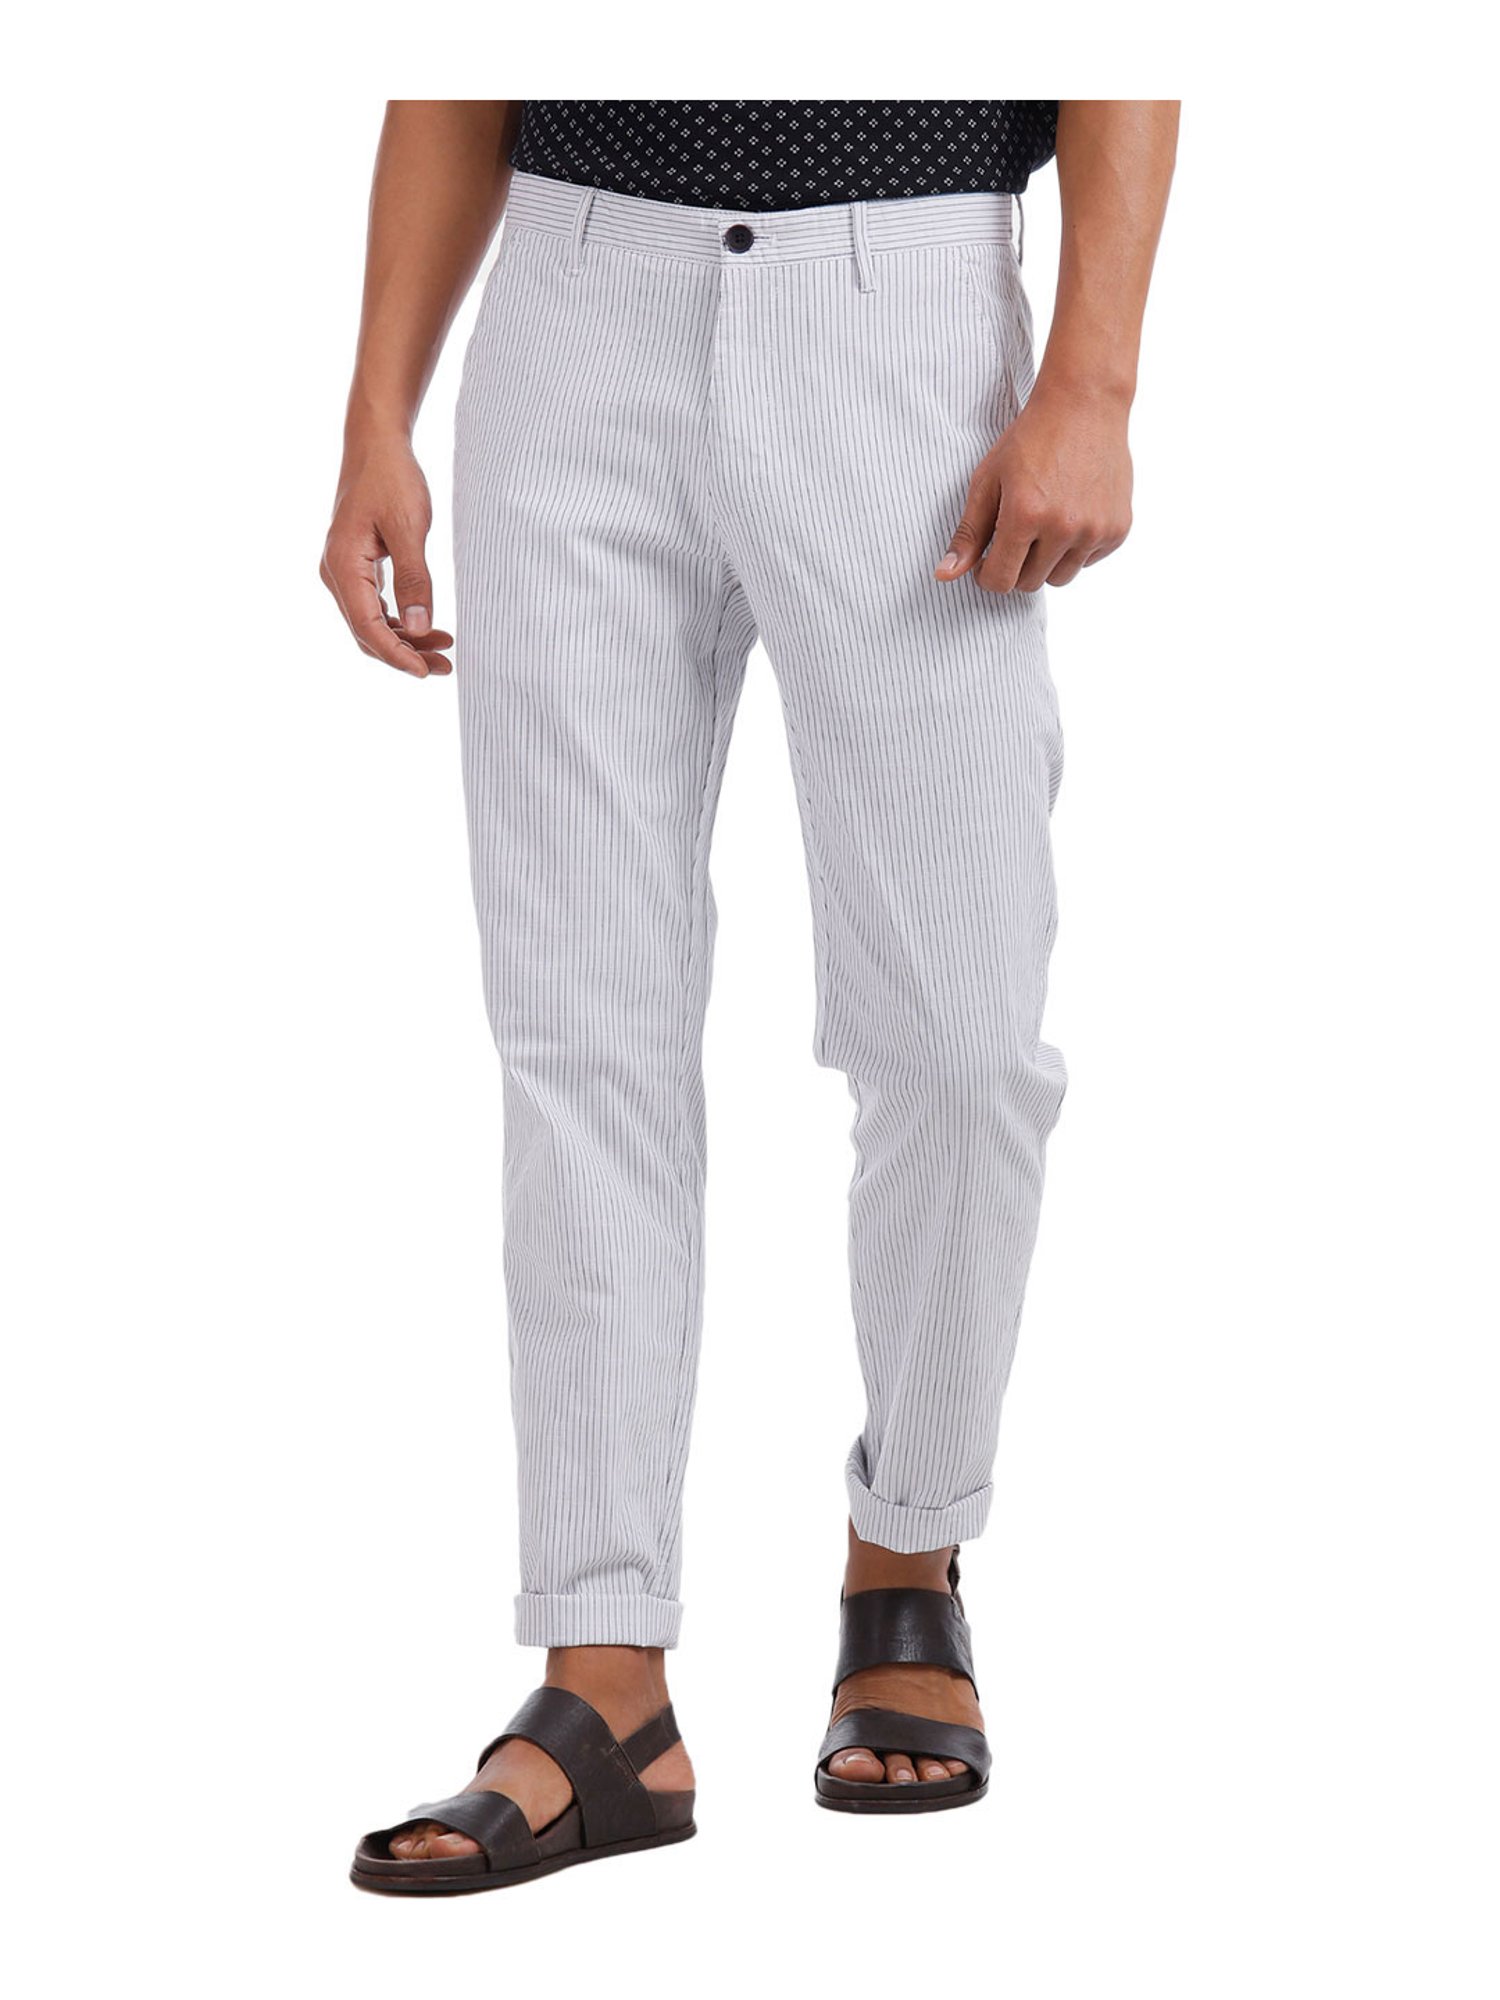 Men's Cotton Blend Navyblue & Offwhite Striped Formal Trousers - Sojanya |  Business casual men, Formal pants, Trousers